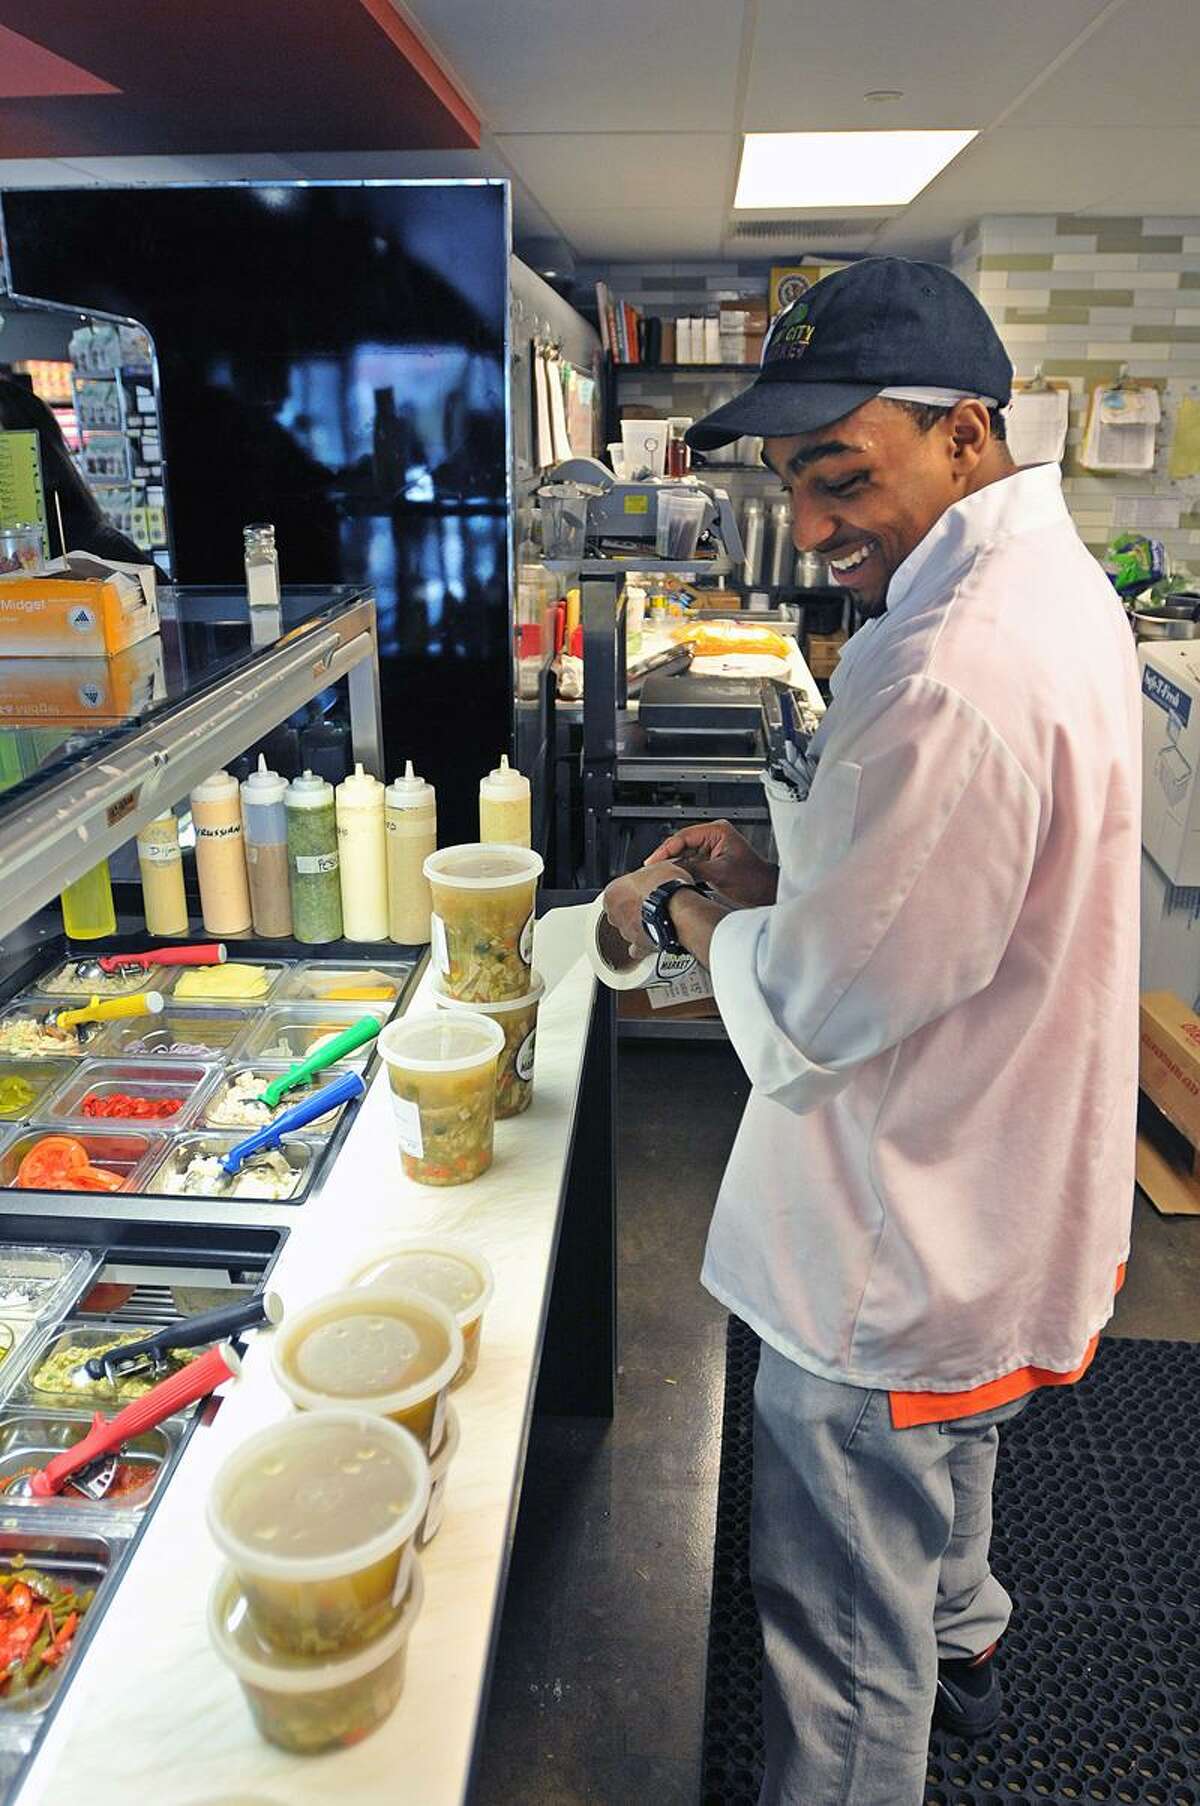 New Haven-- Terry Williams fills soups for customers at the new Elm City Market at 360 State Street. Williams, an ex-offender got the job at the city Re-Entry Roundtable job fair held in October. Peter Casolino/New Haven Register02/07/12